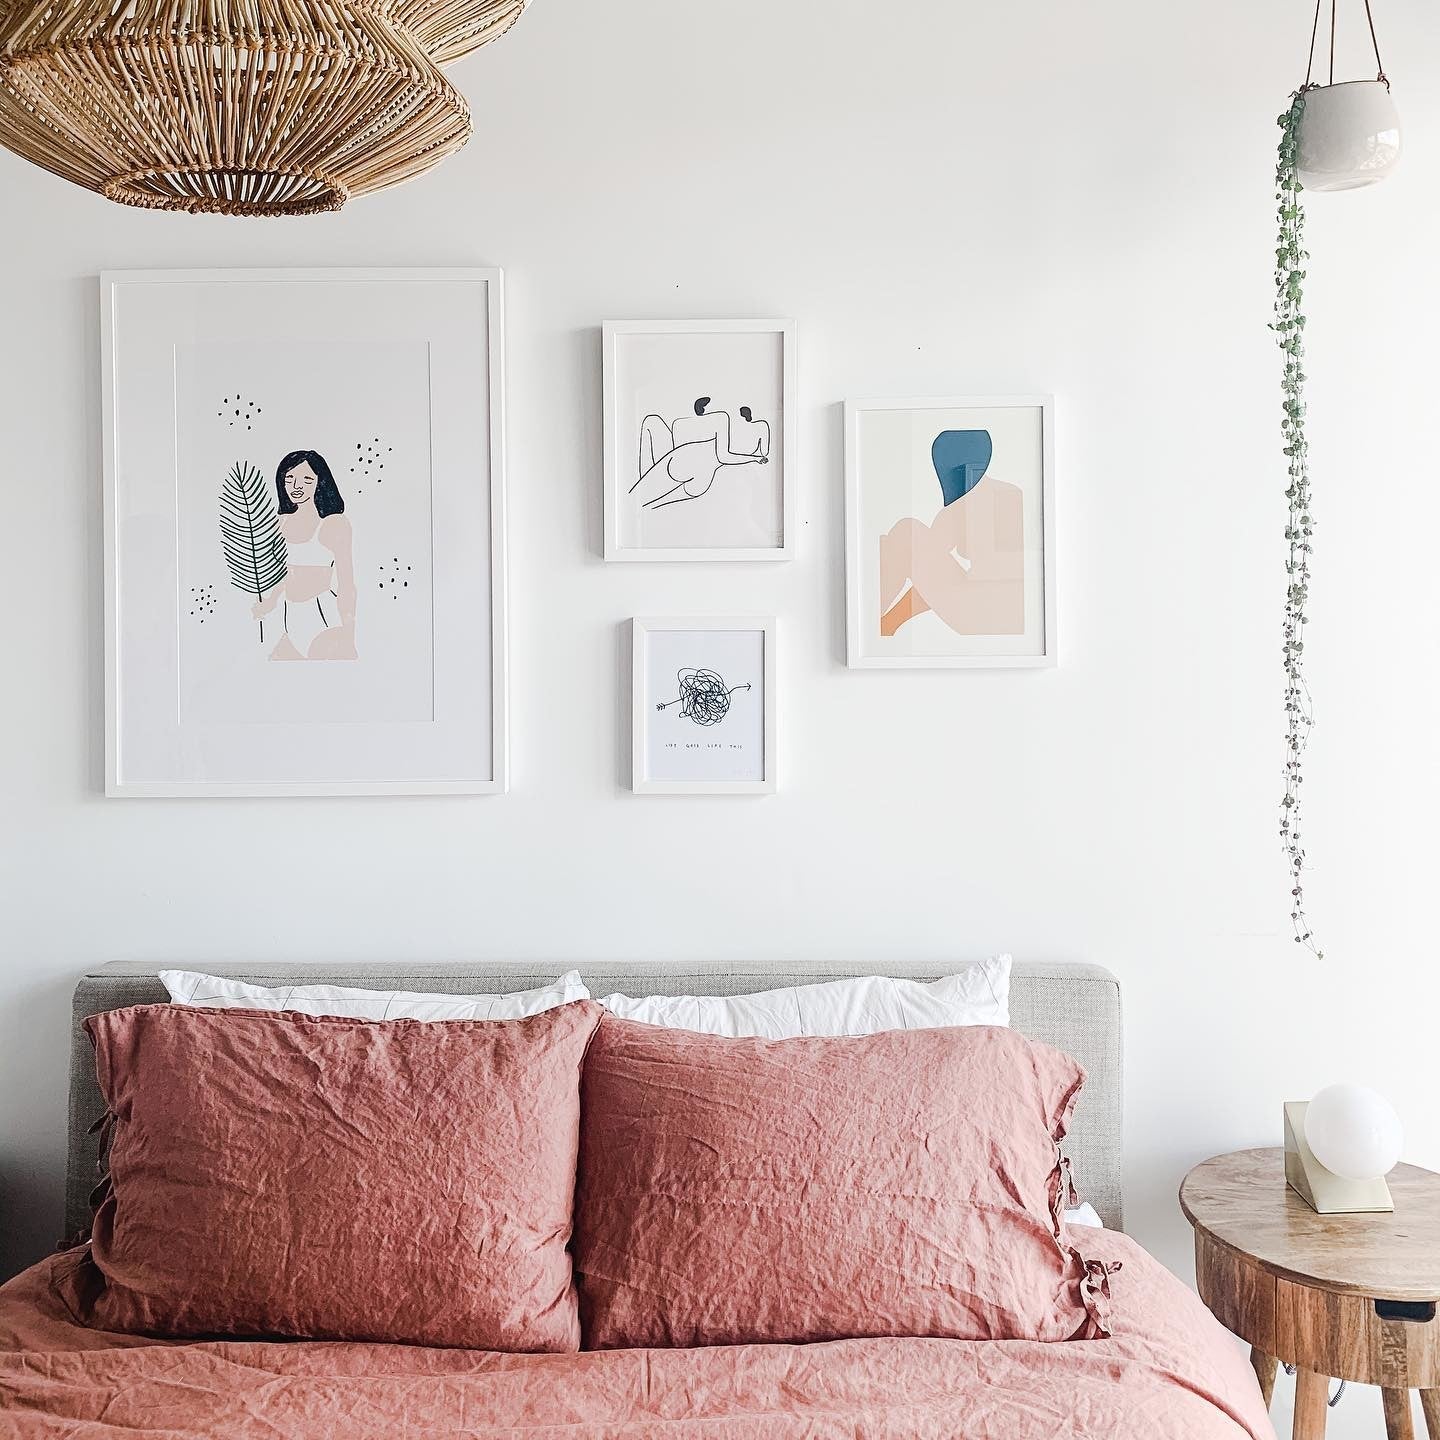 Bedroom Gallery Wall of White Framed Prints